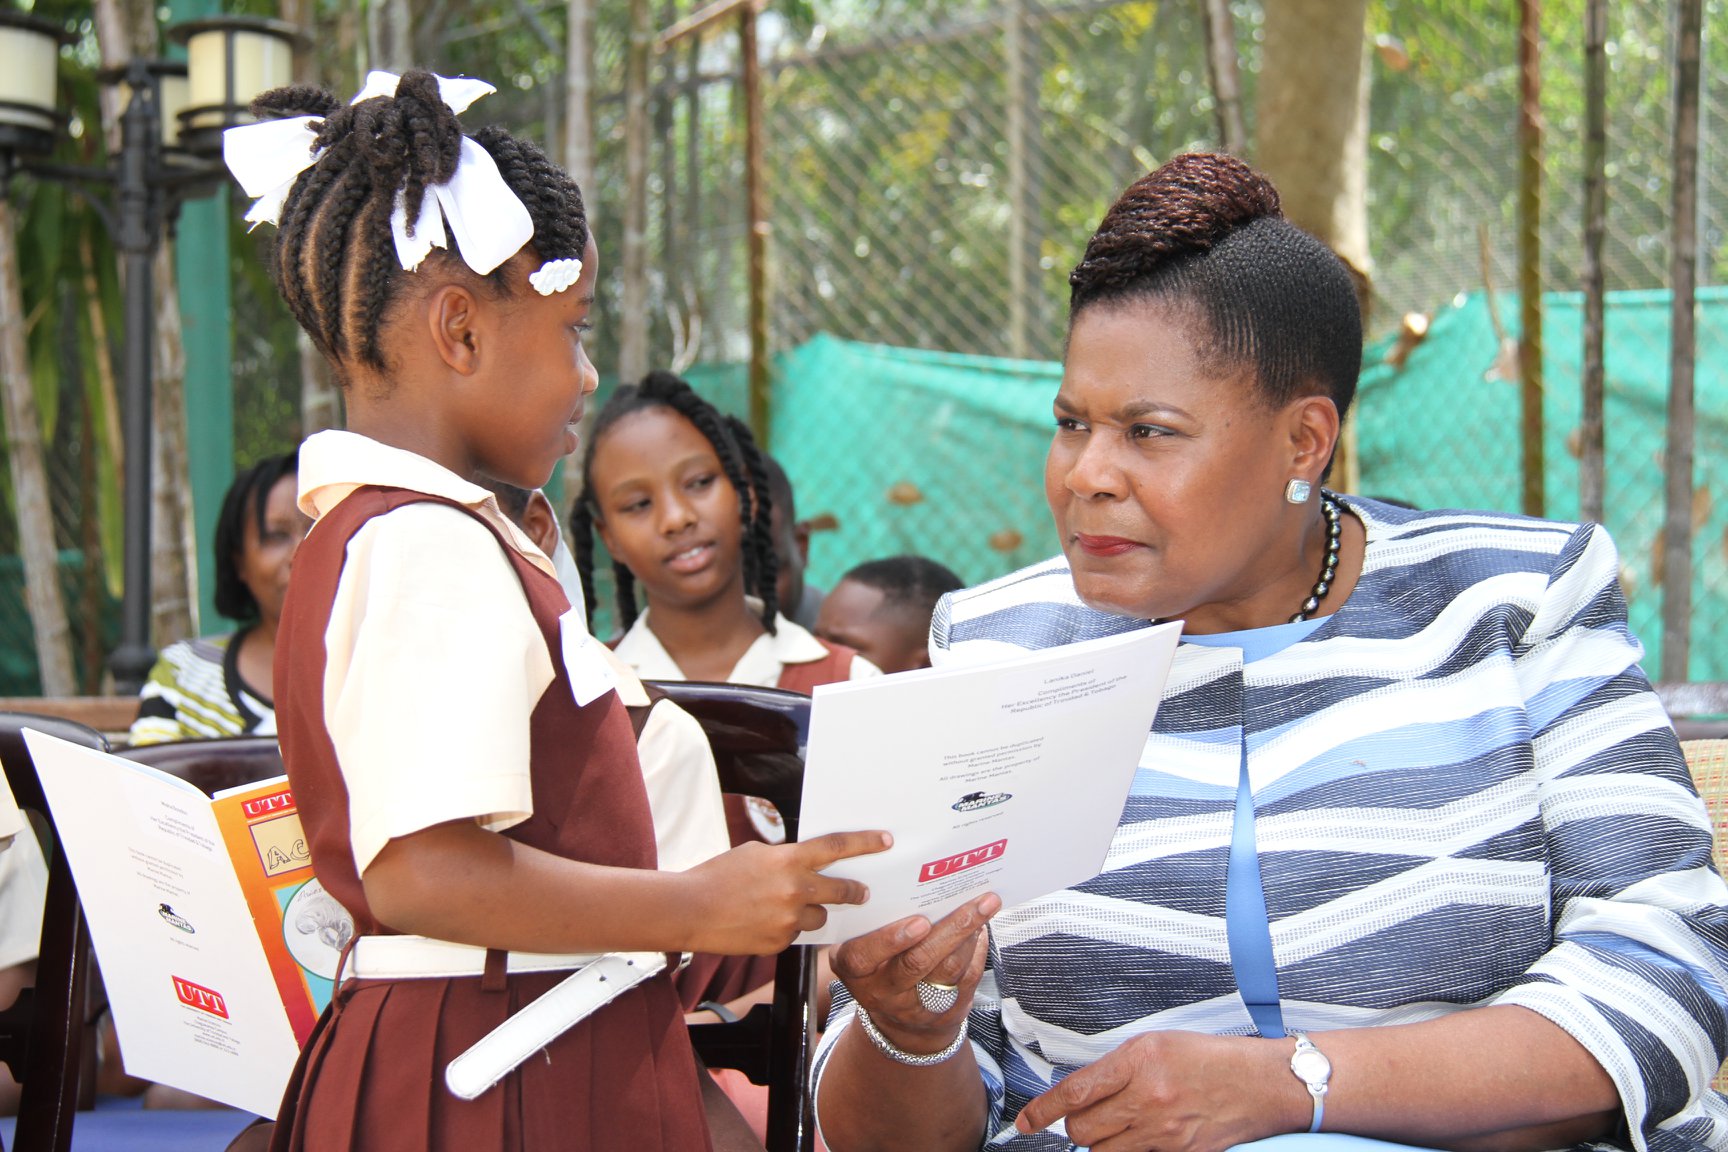 Her Excellency Hosts Sangre Grande Seventh Day Adventist Primary School